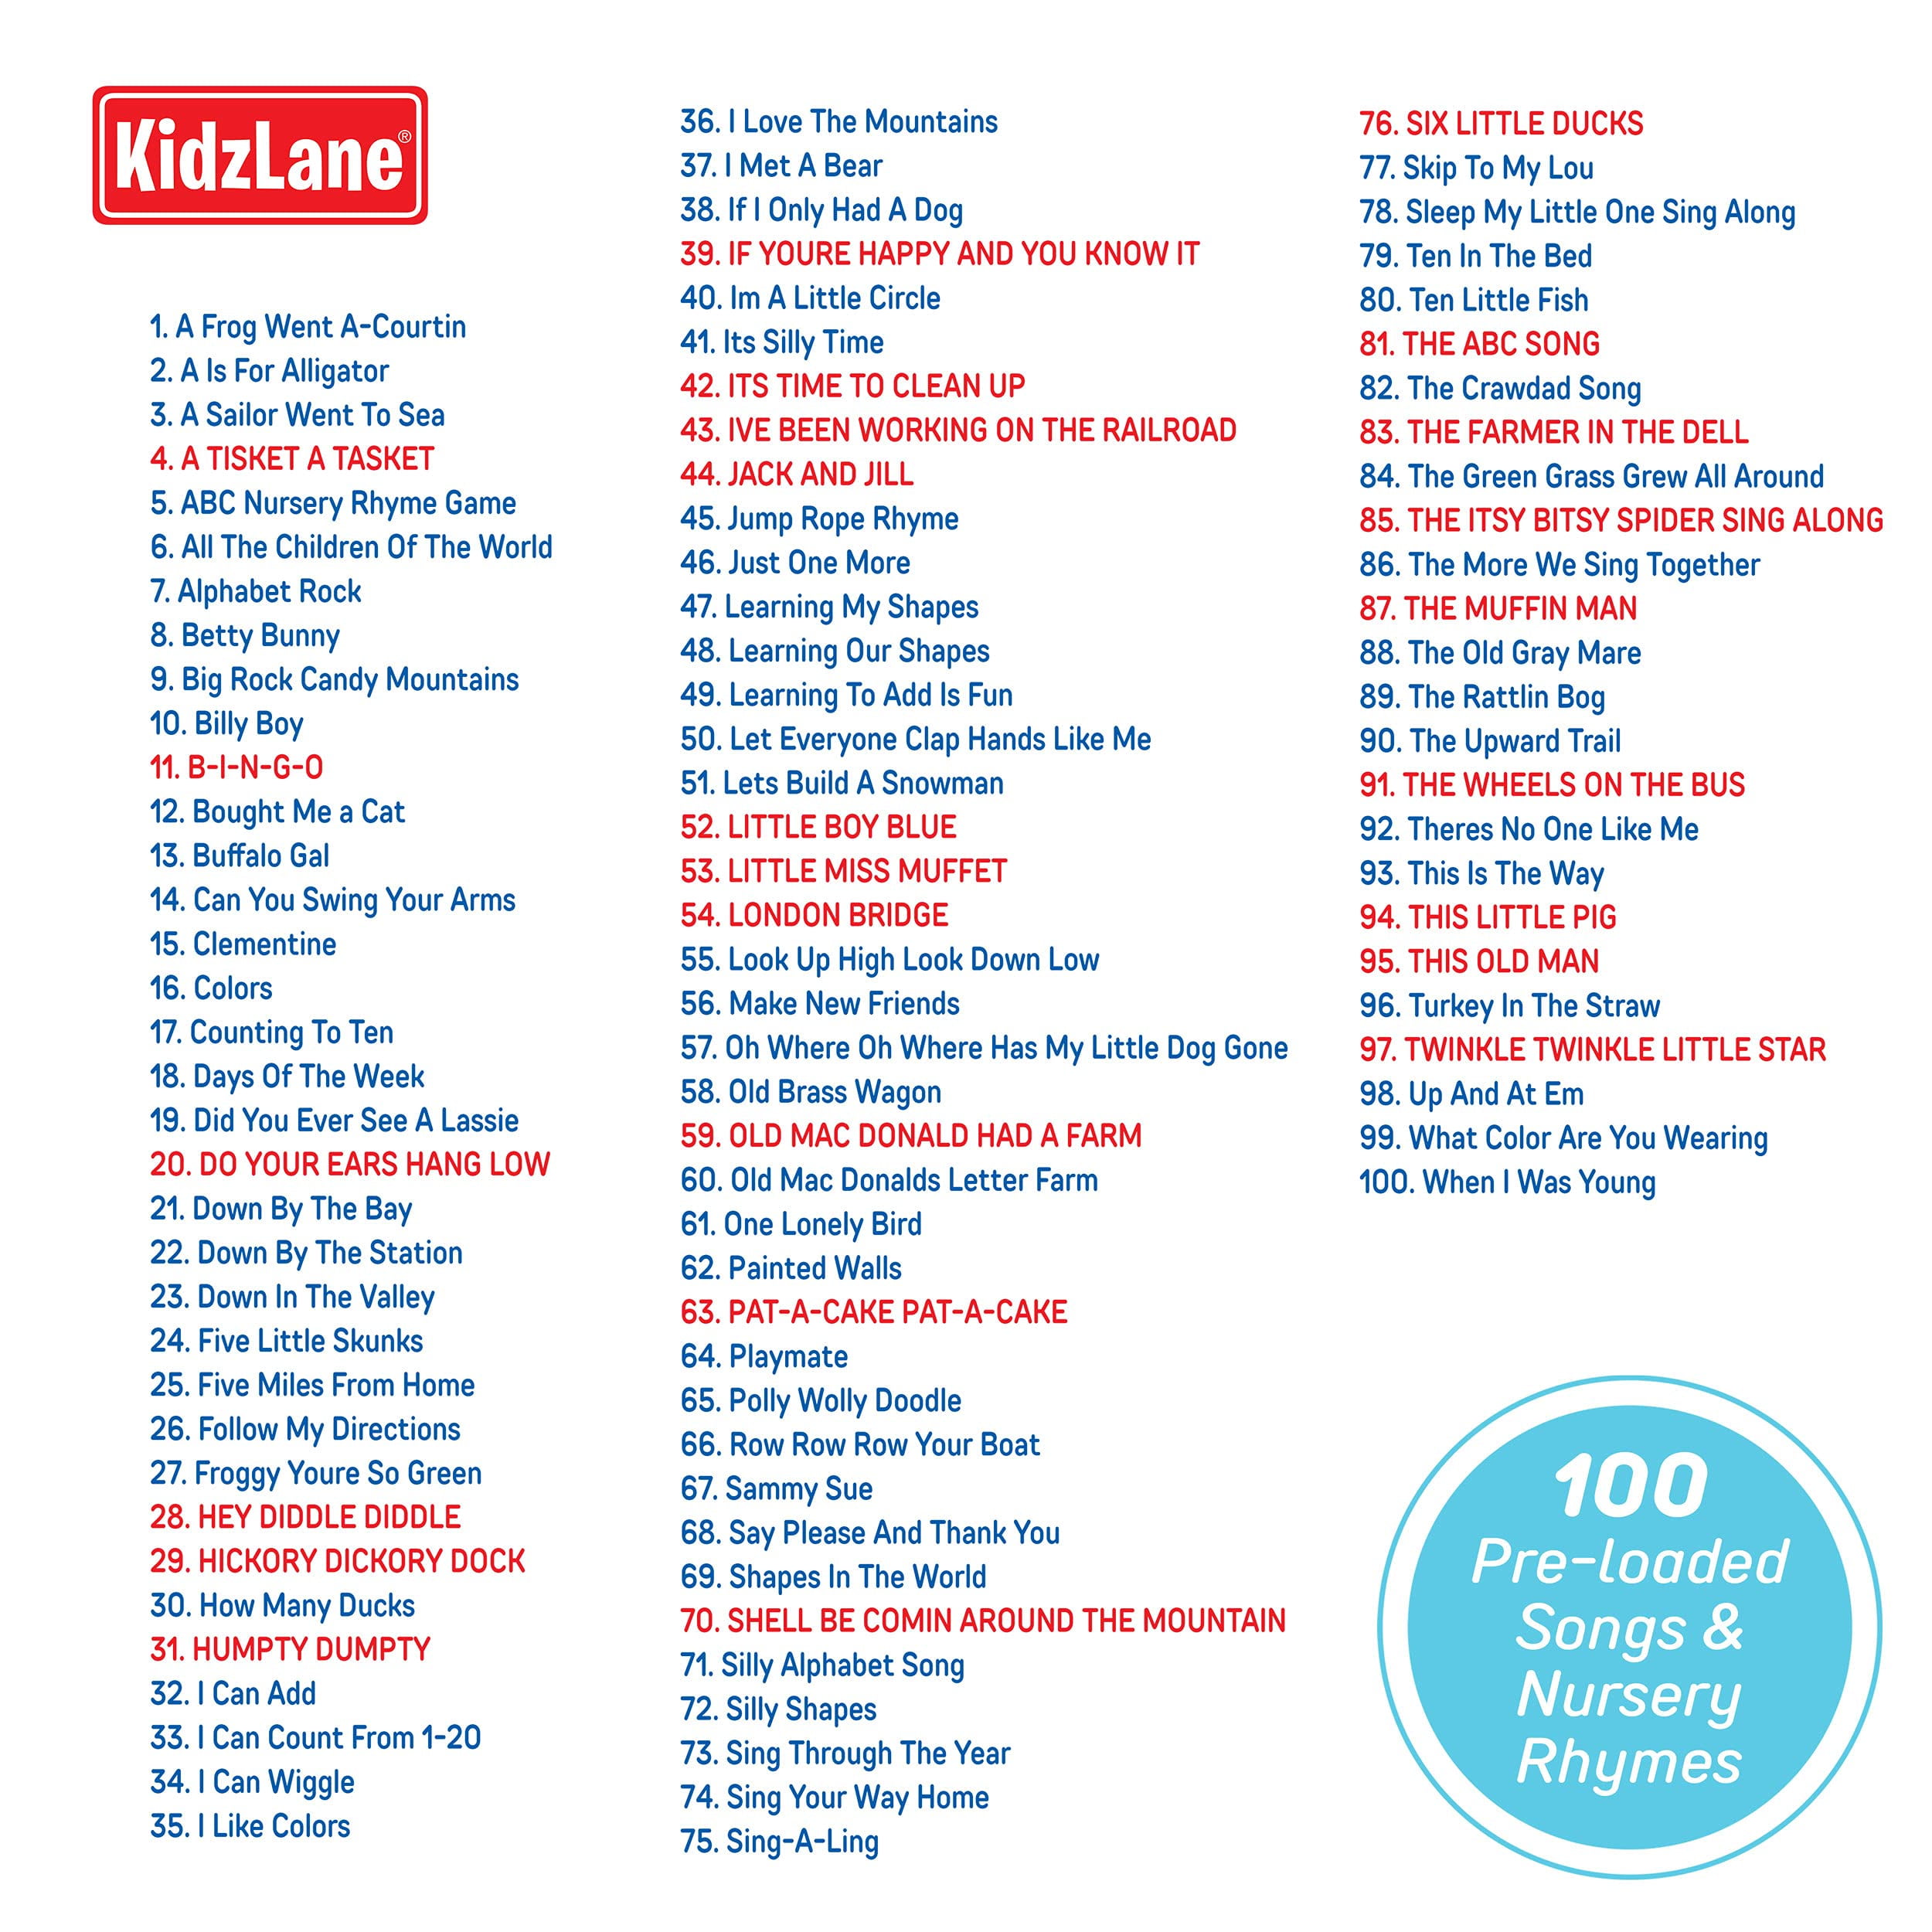 Karaoke Song List (By Song Title)